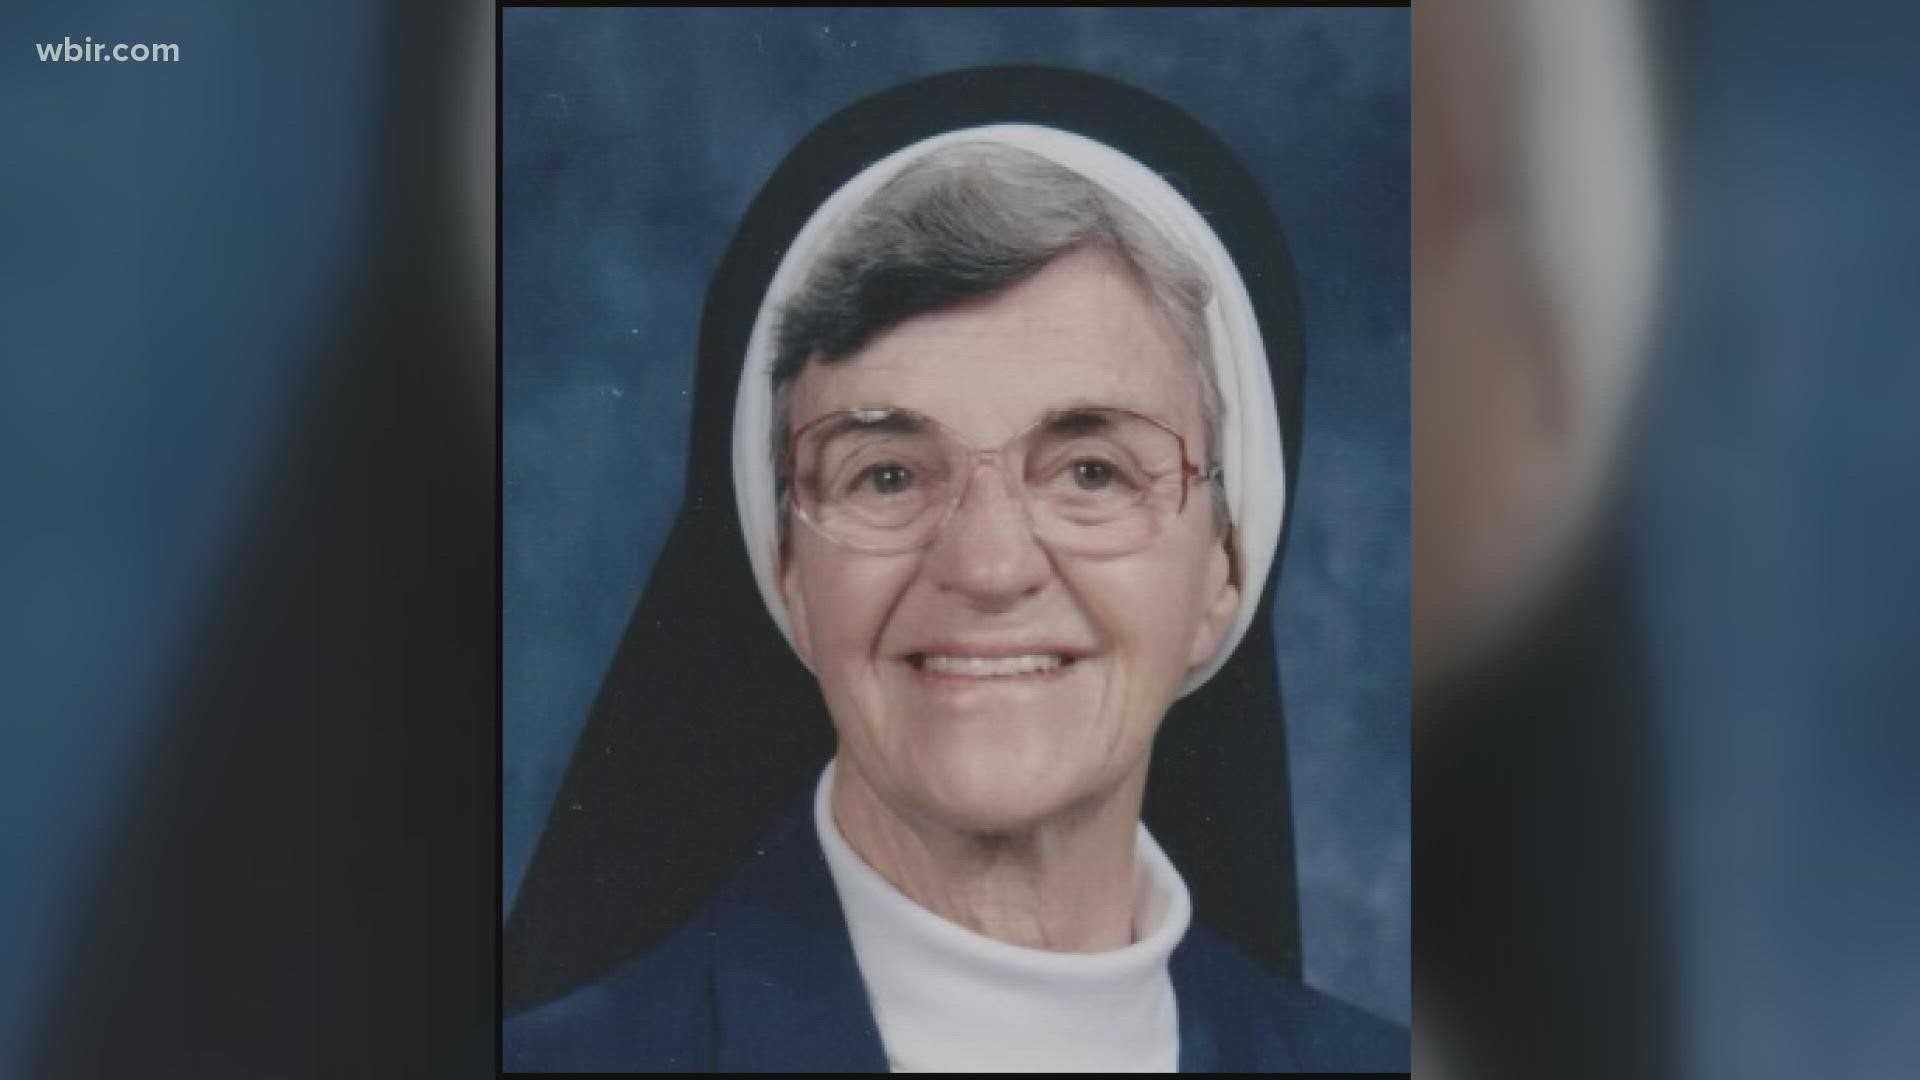 Sister Maris Stella Mogan was a Sister of Mercy for 68 years and held positions in education in many Catholic schools in the state.